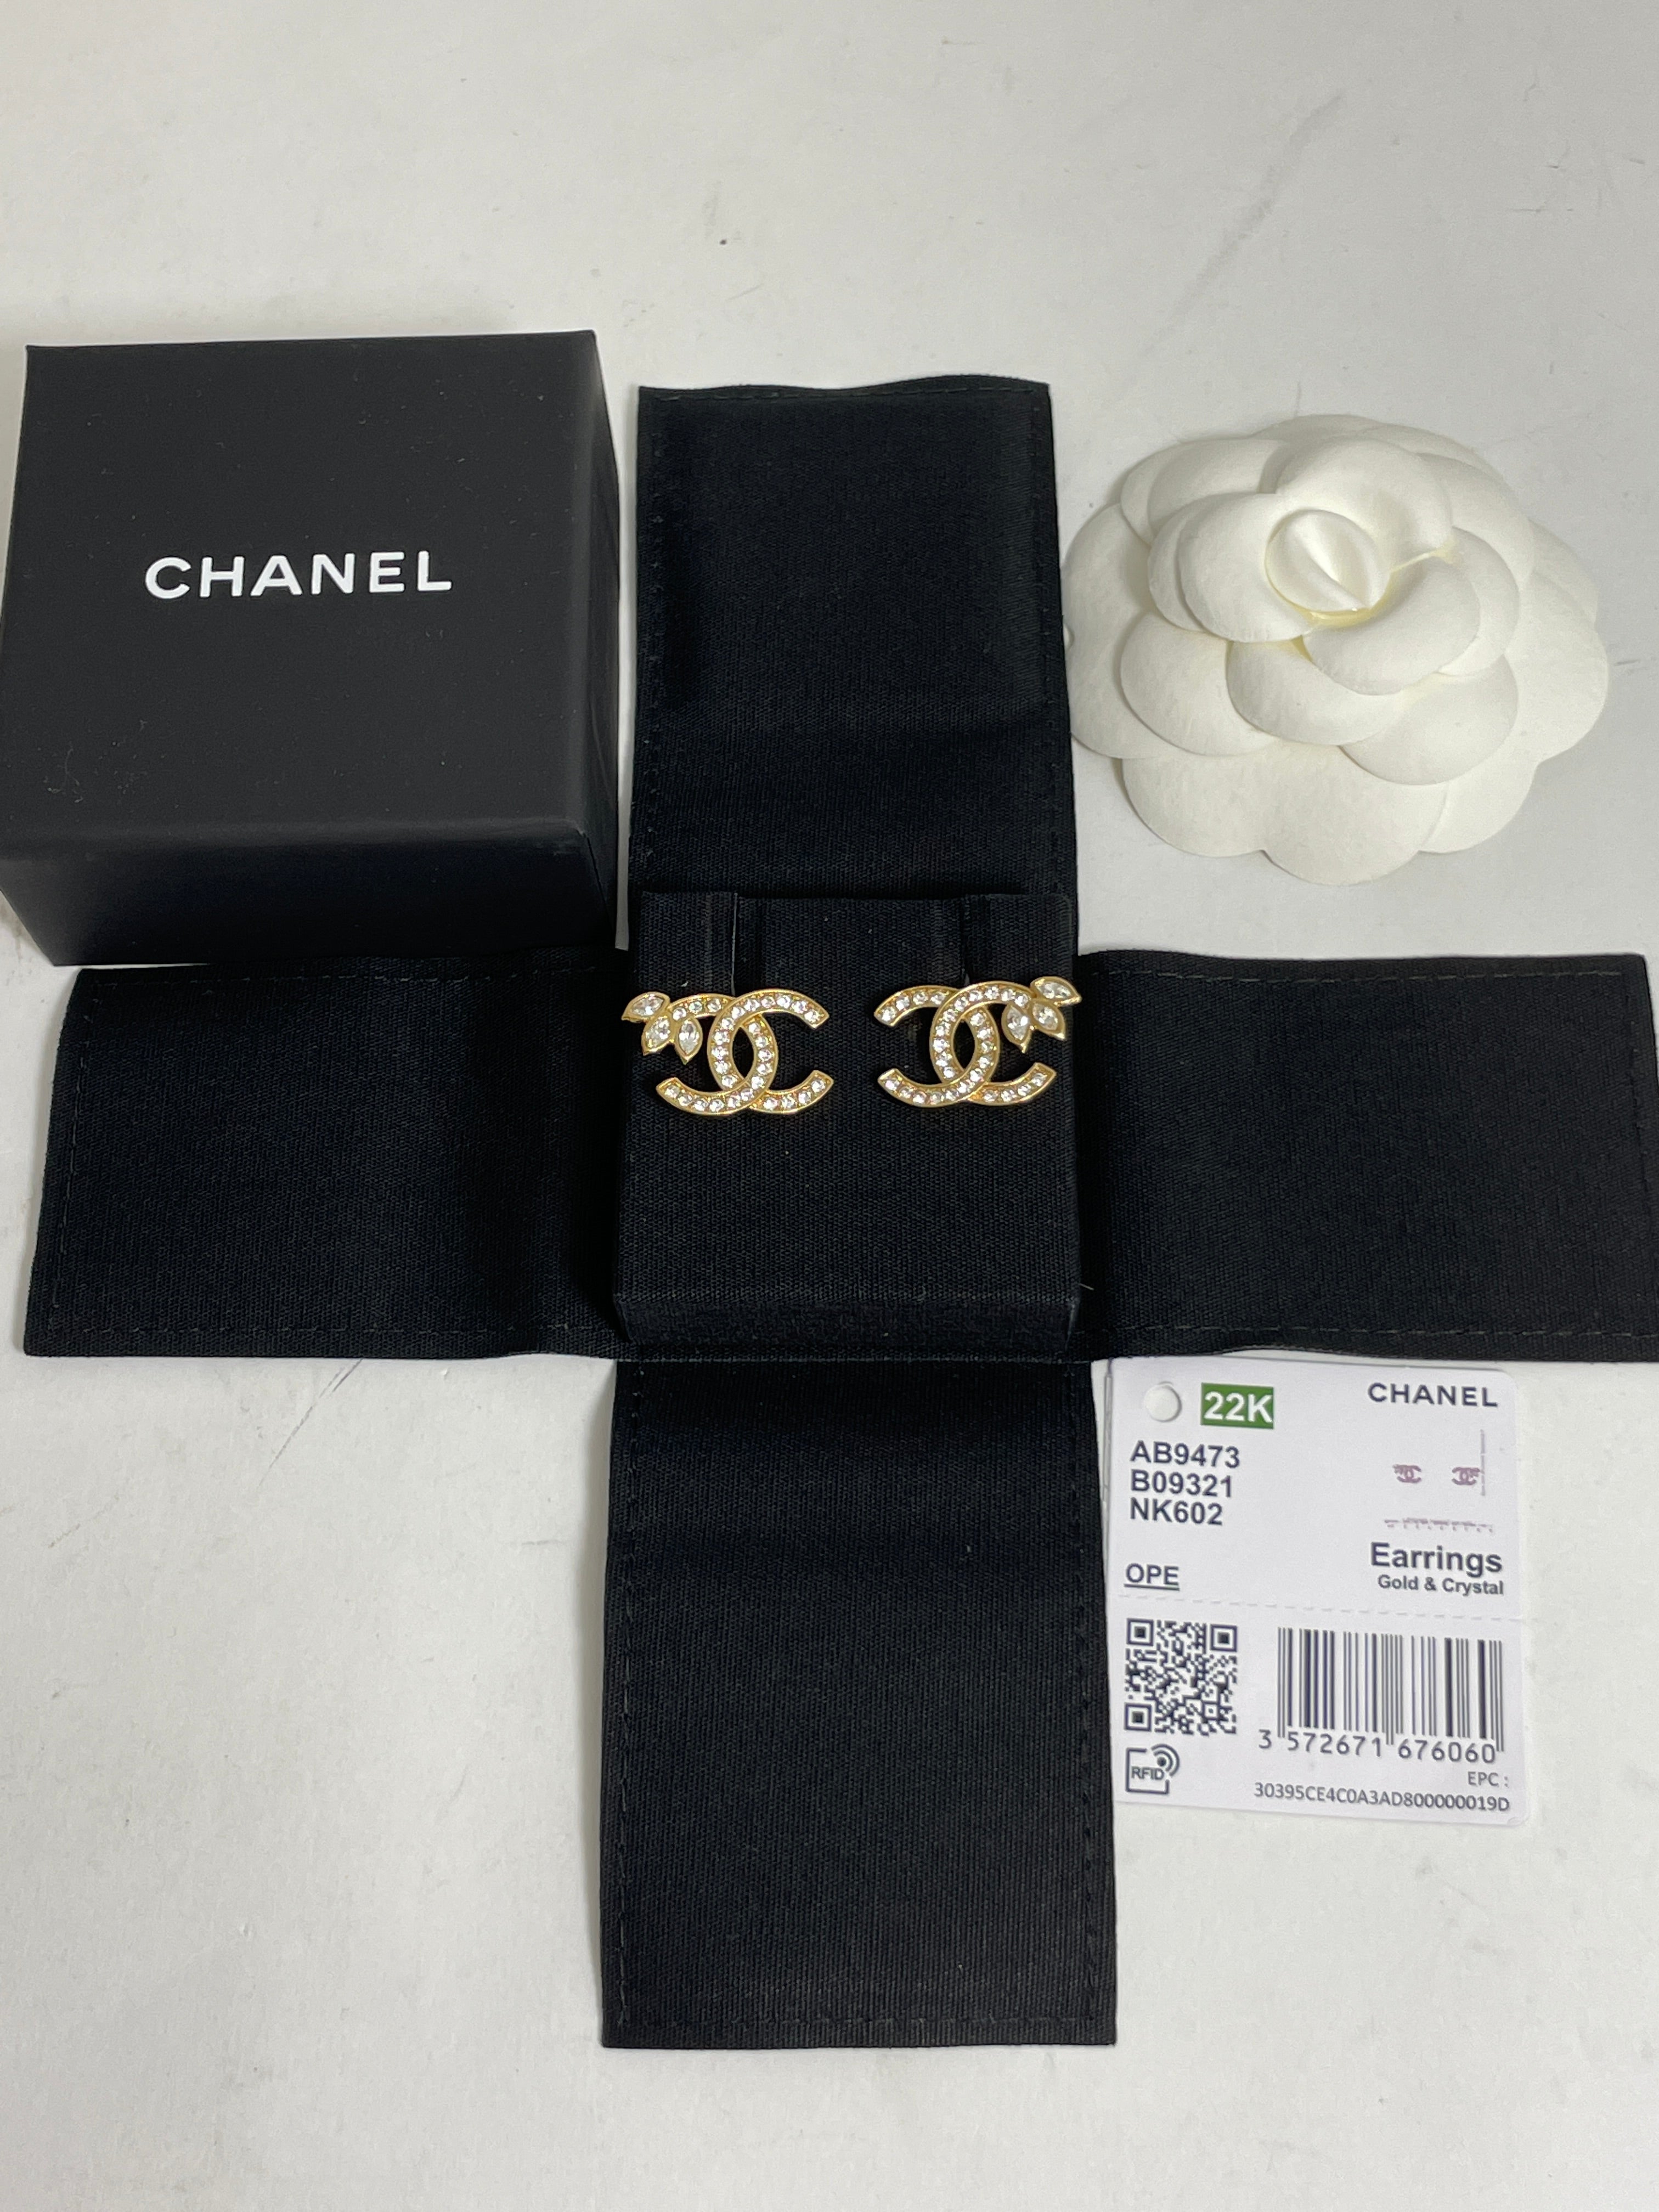 Chanel CC Crystal No.5 Drop Earrings Gold Tone 22S – Coco Approved Studio